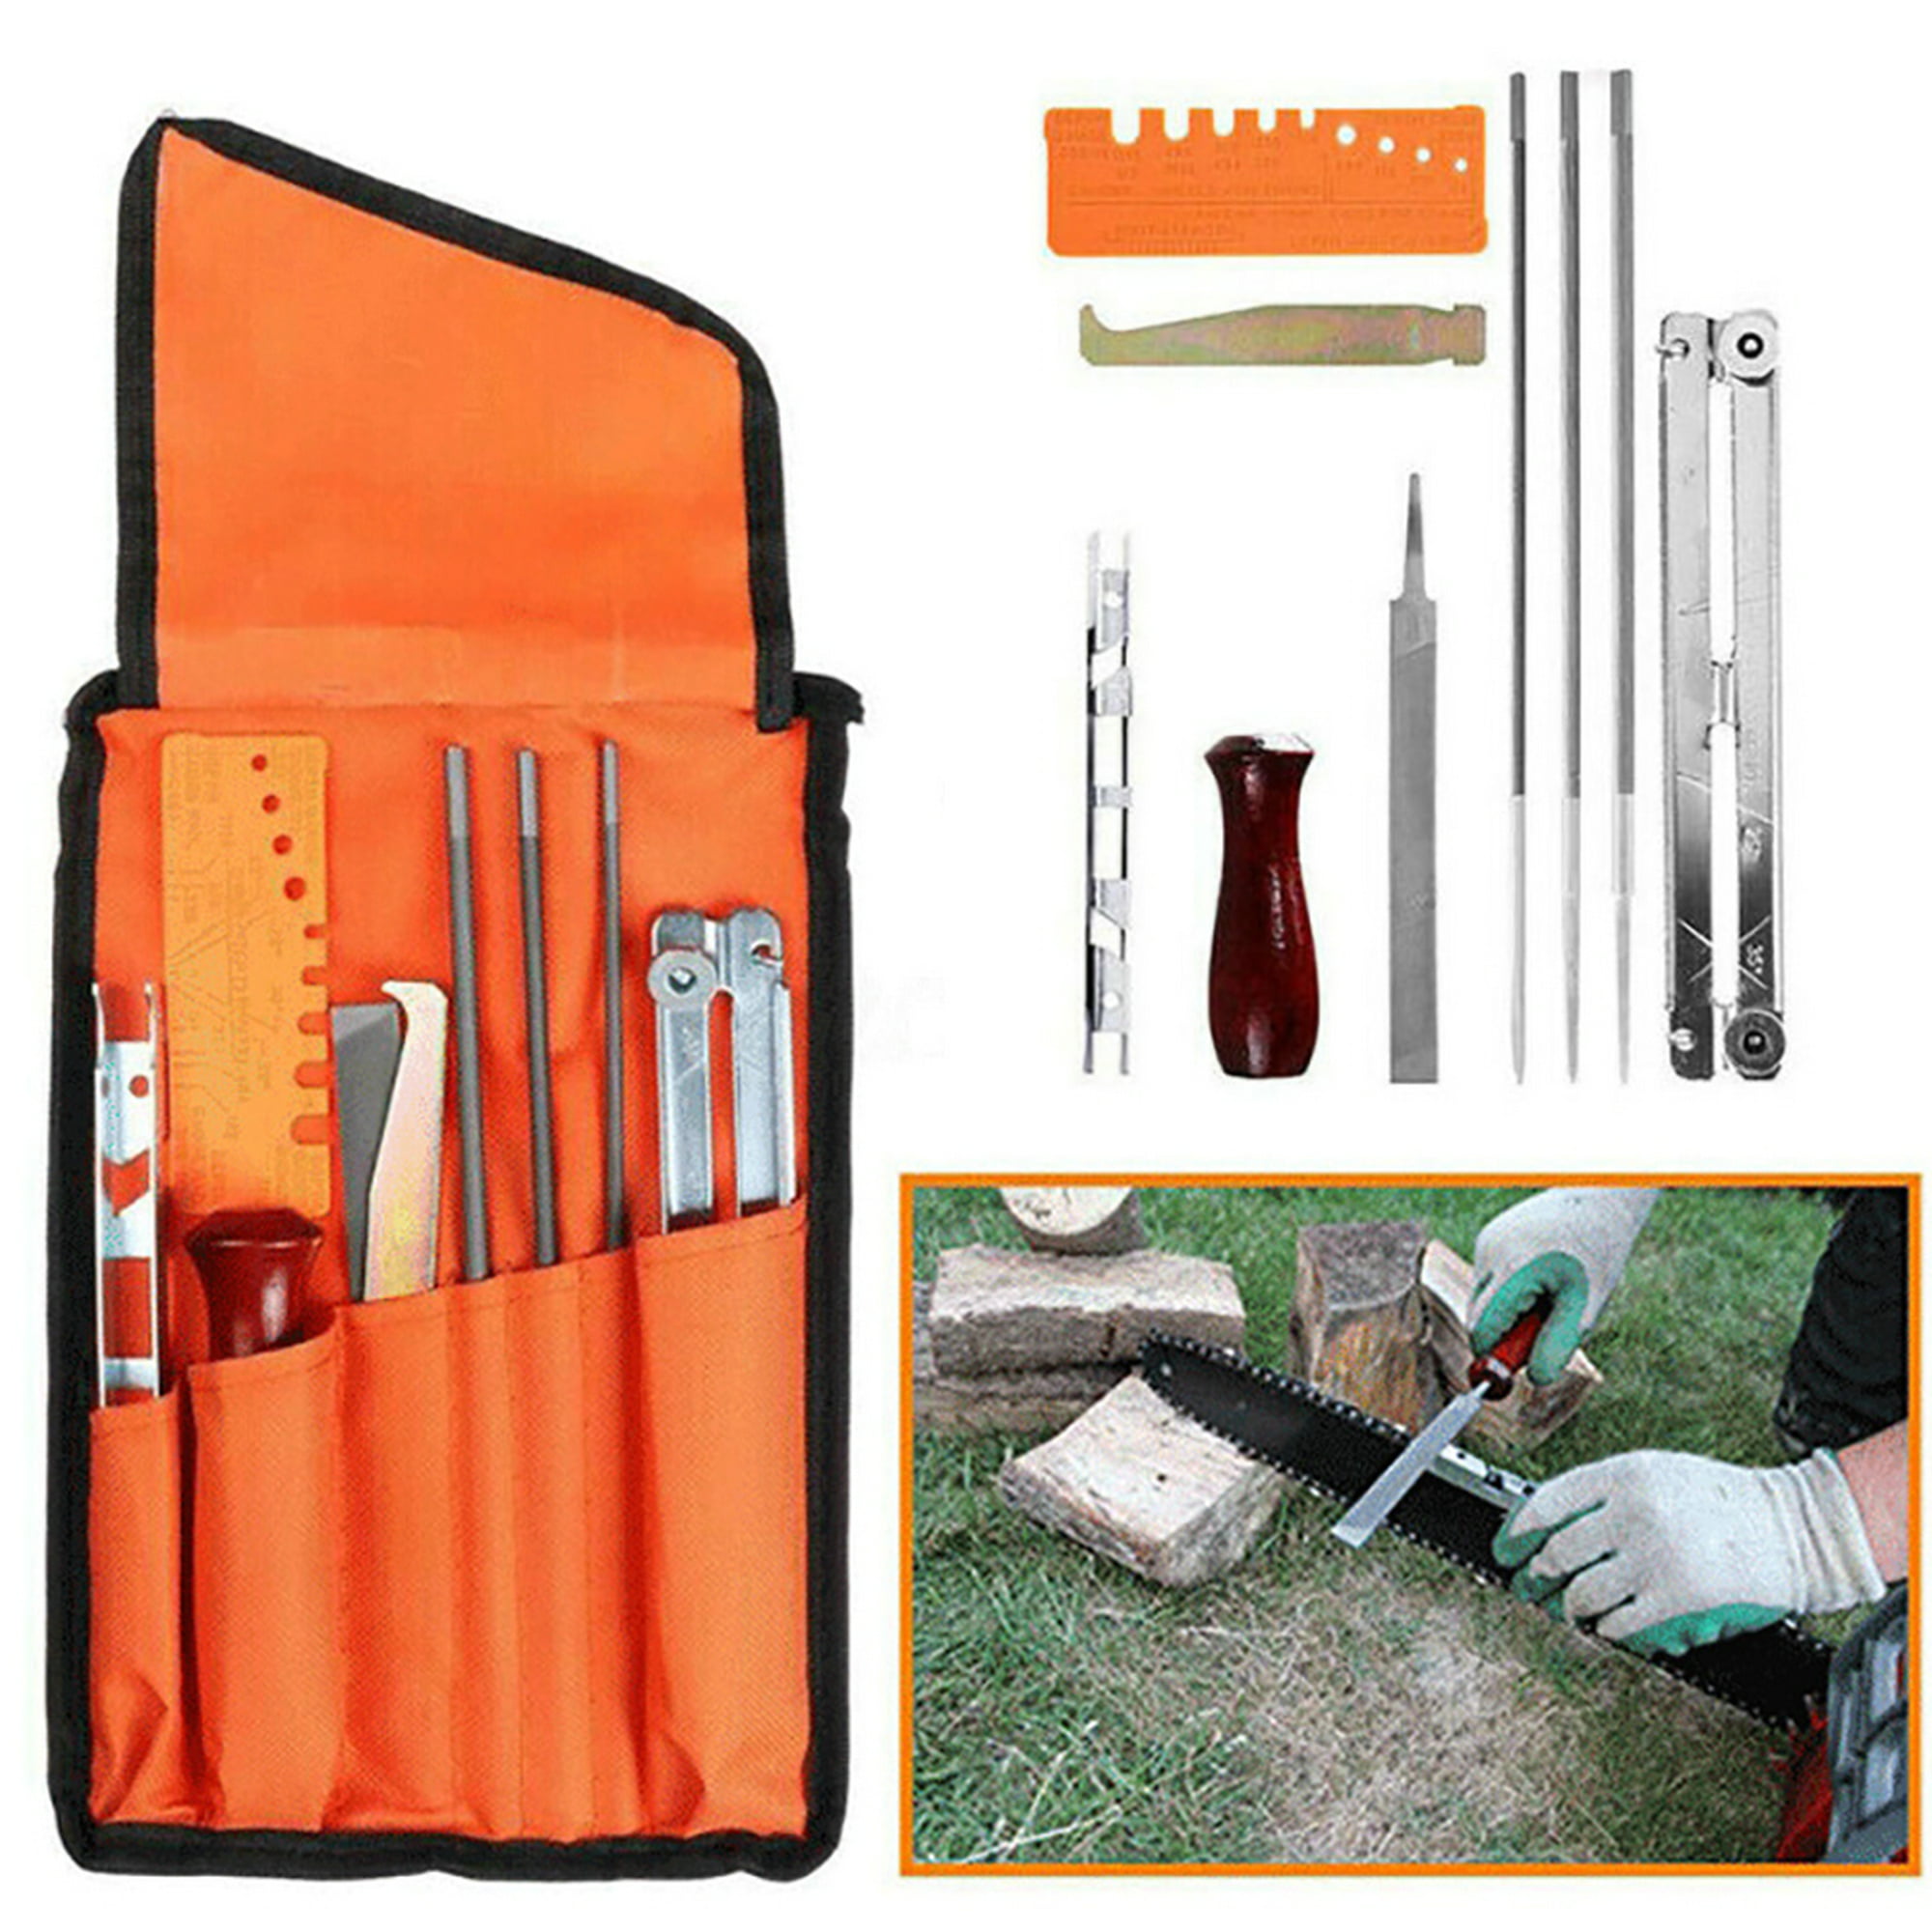 10Pcs Durable Chainsaw Sharpening File Filing Kit Chain Sharpen Saw Files Tool